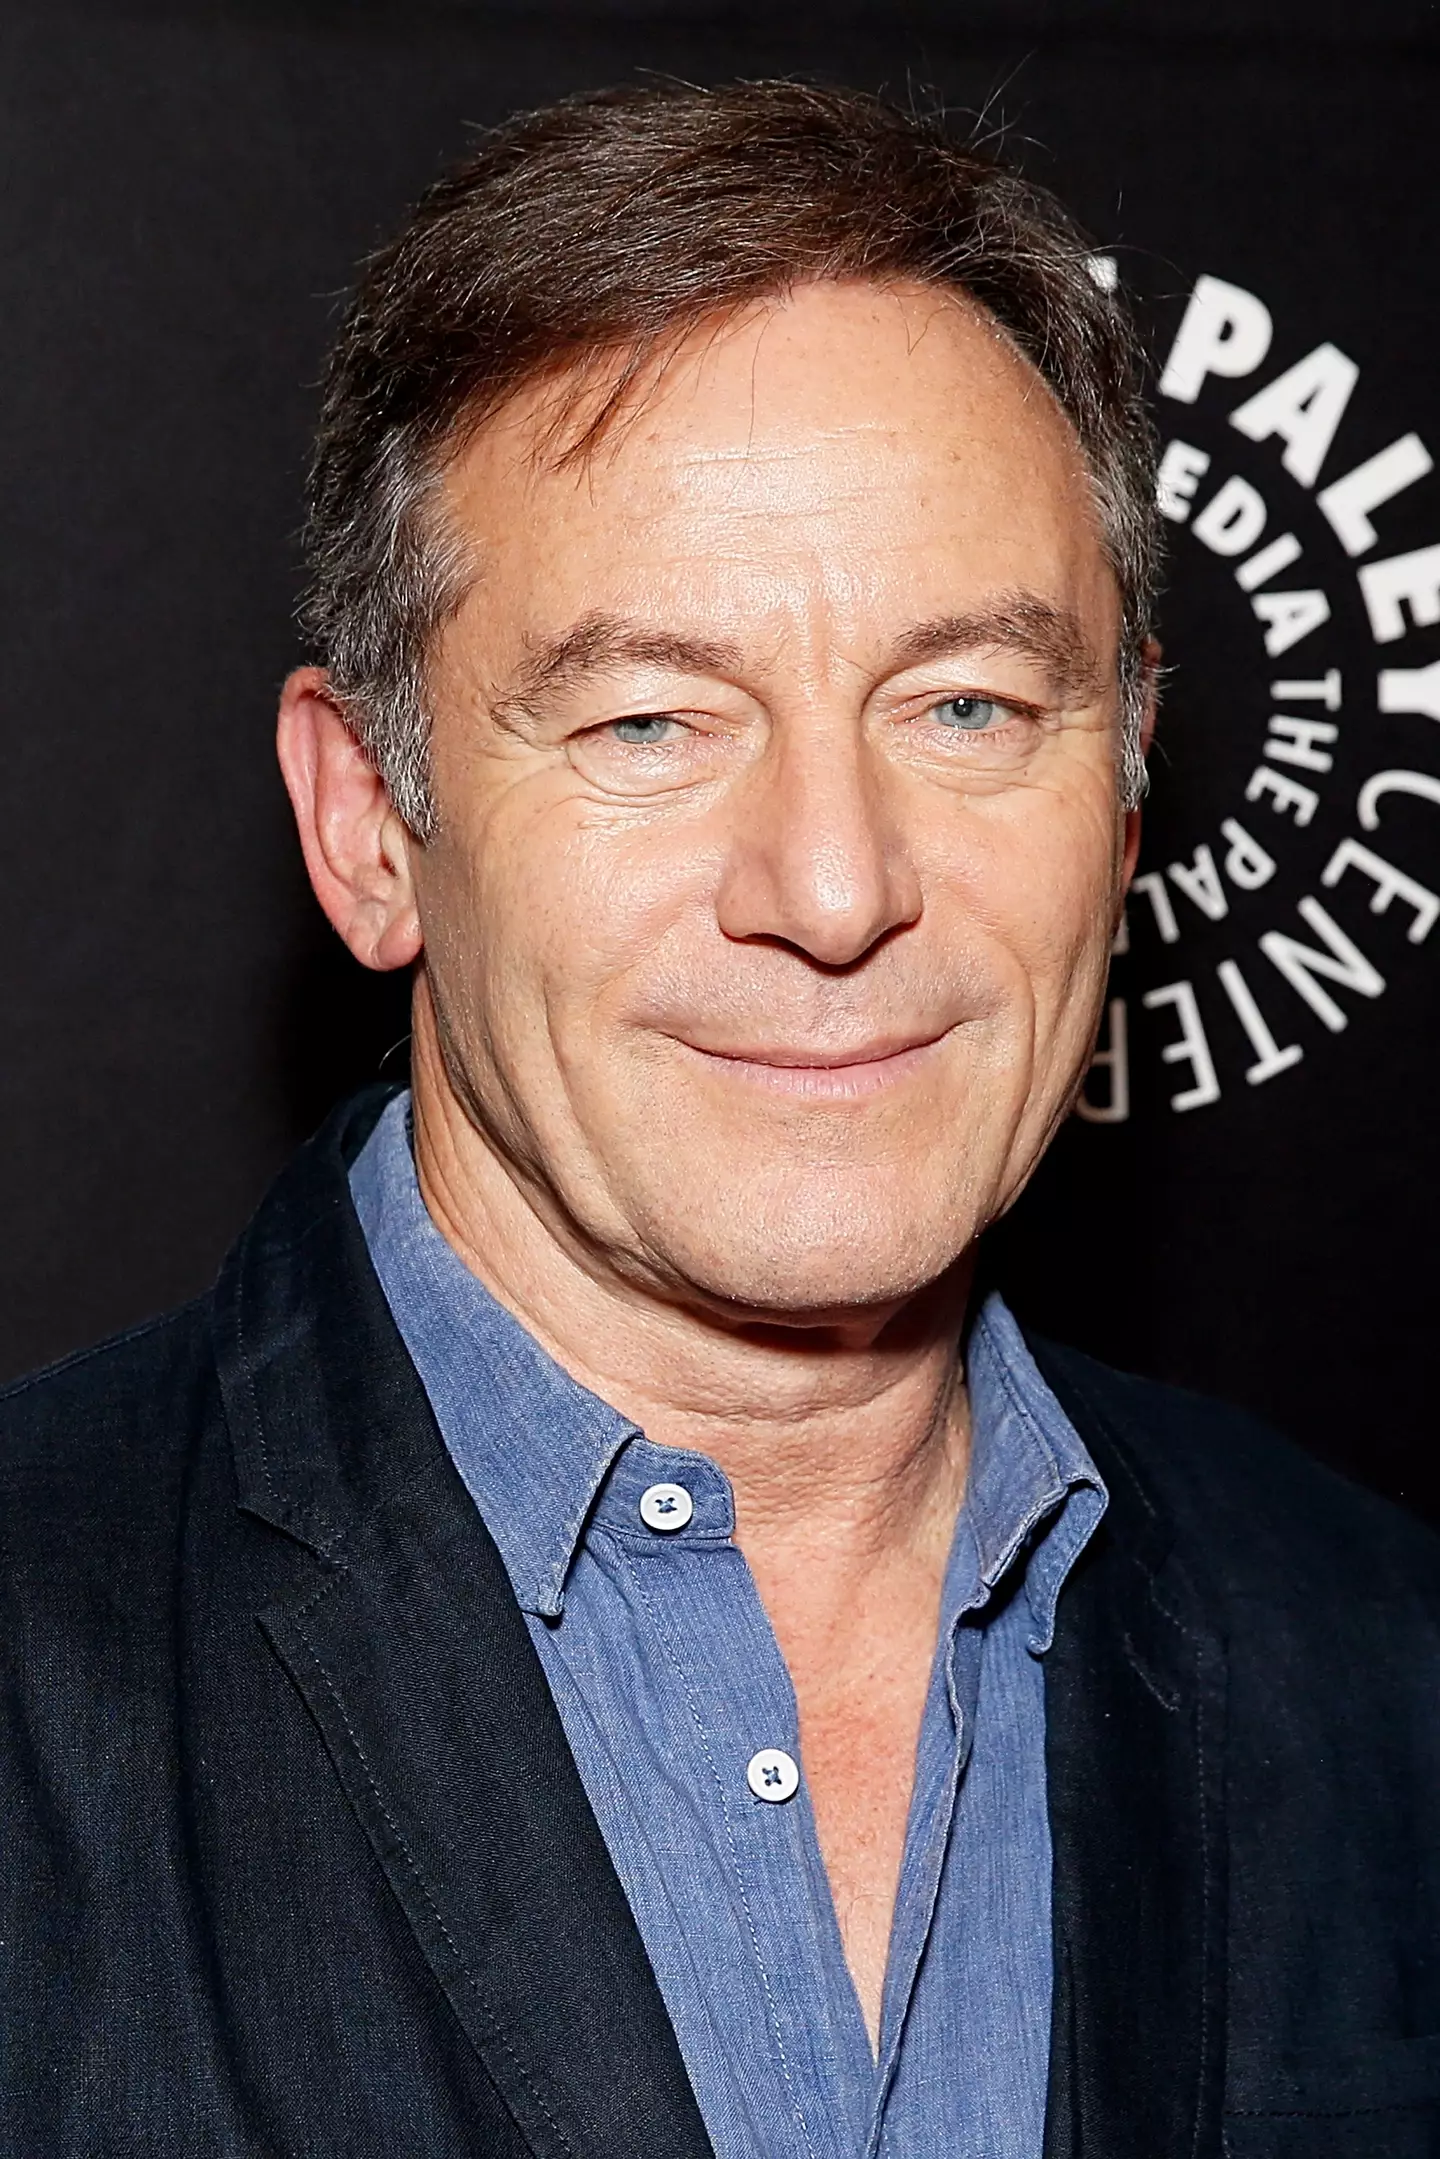 Harry Potter star Jason Isaacs is also set to star.